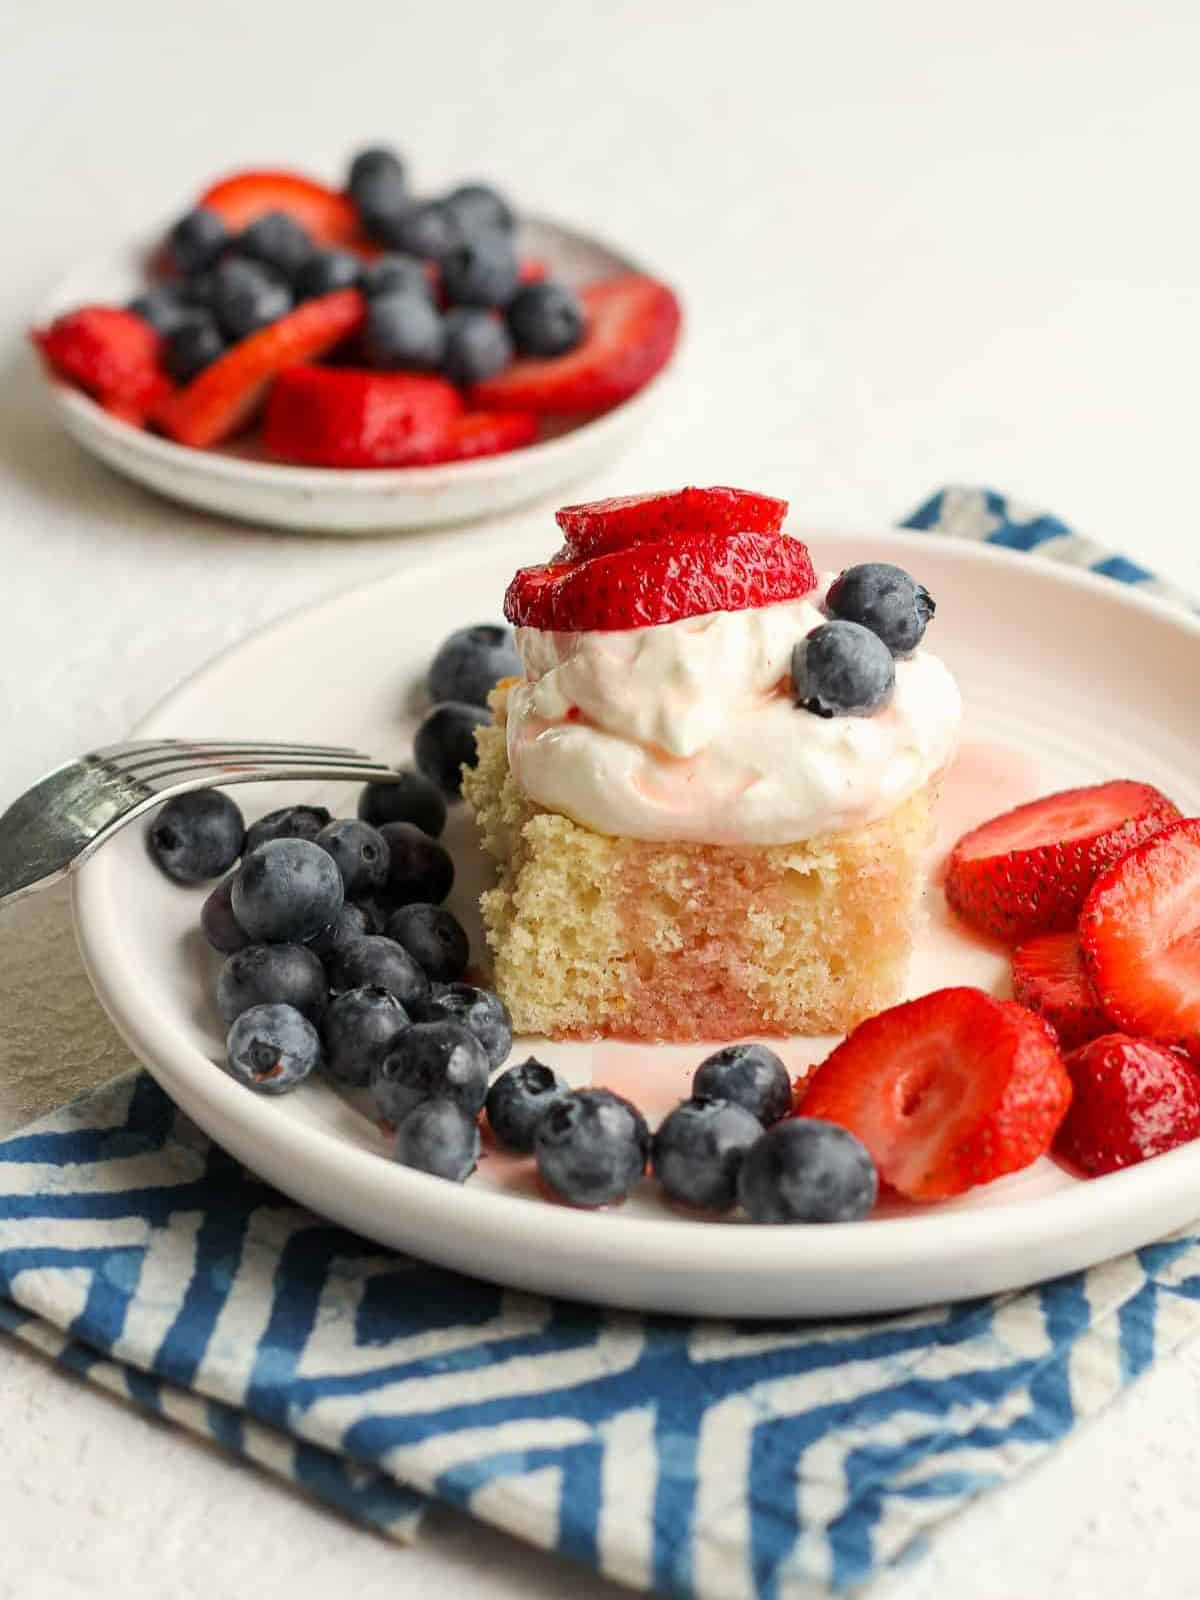 delectable buttermilk dessert with fresh strawberries, a heavenly strawberry shortcake treat.